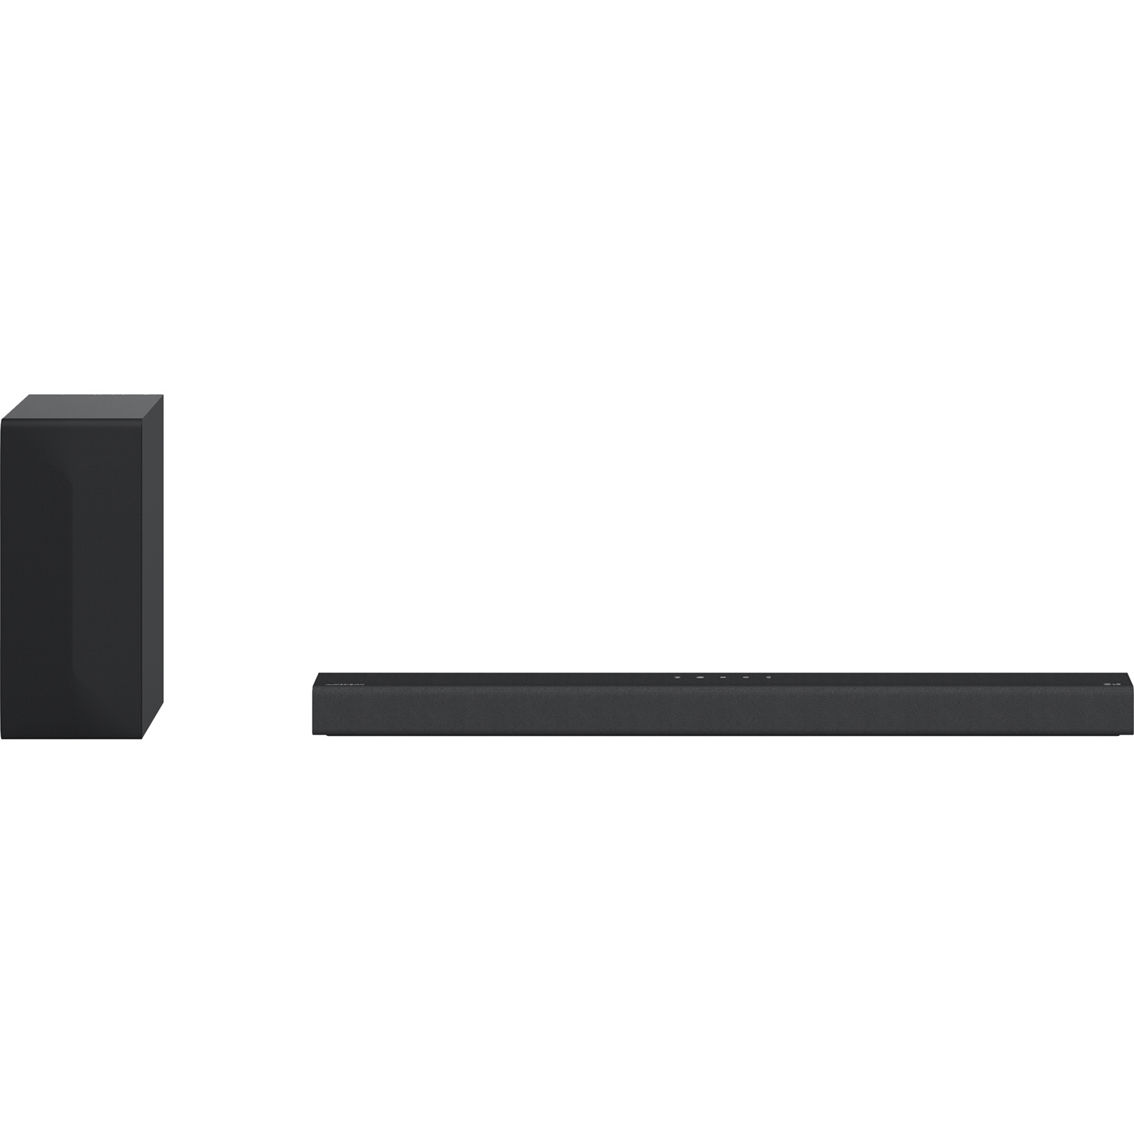 LG S65Q 3.1 Channel 420W High Res Sound Bar with DTS Virtual:X - Image 1 of 2